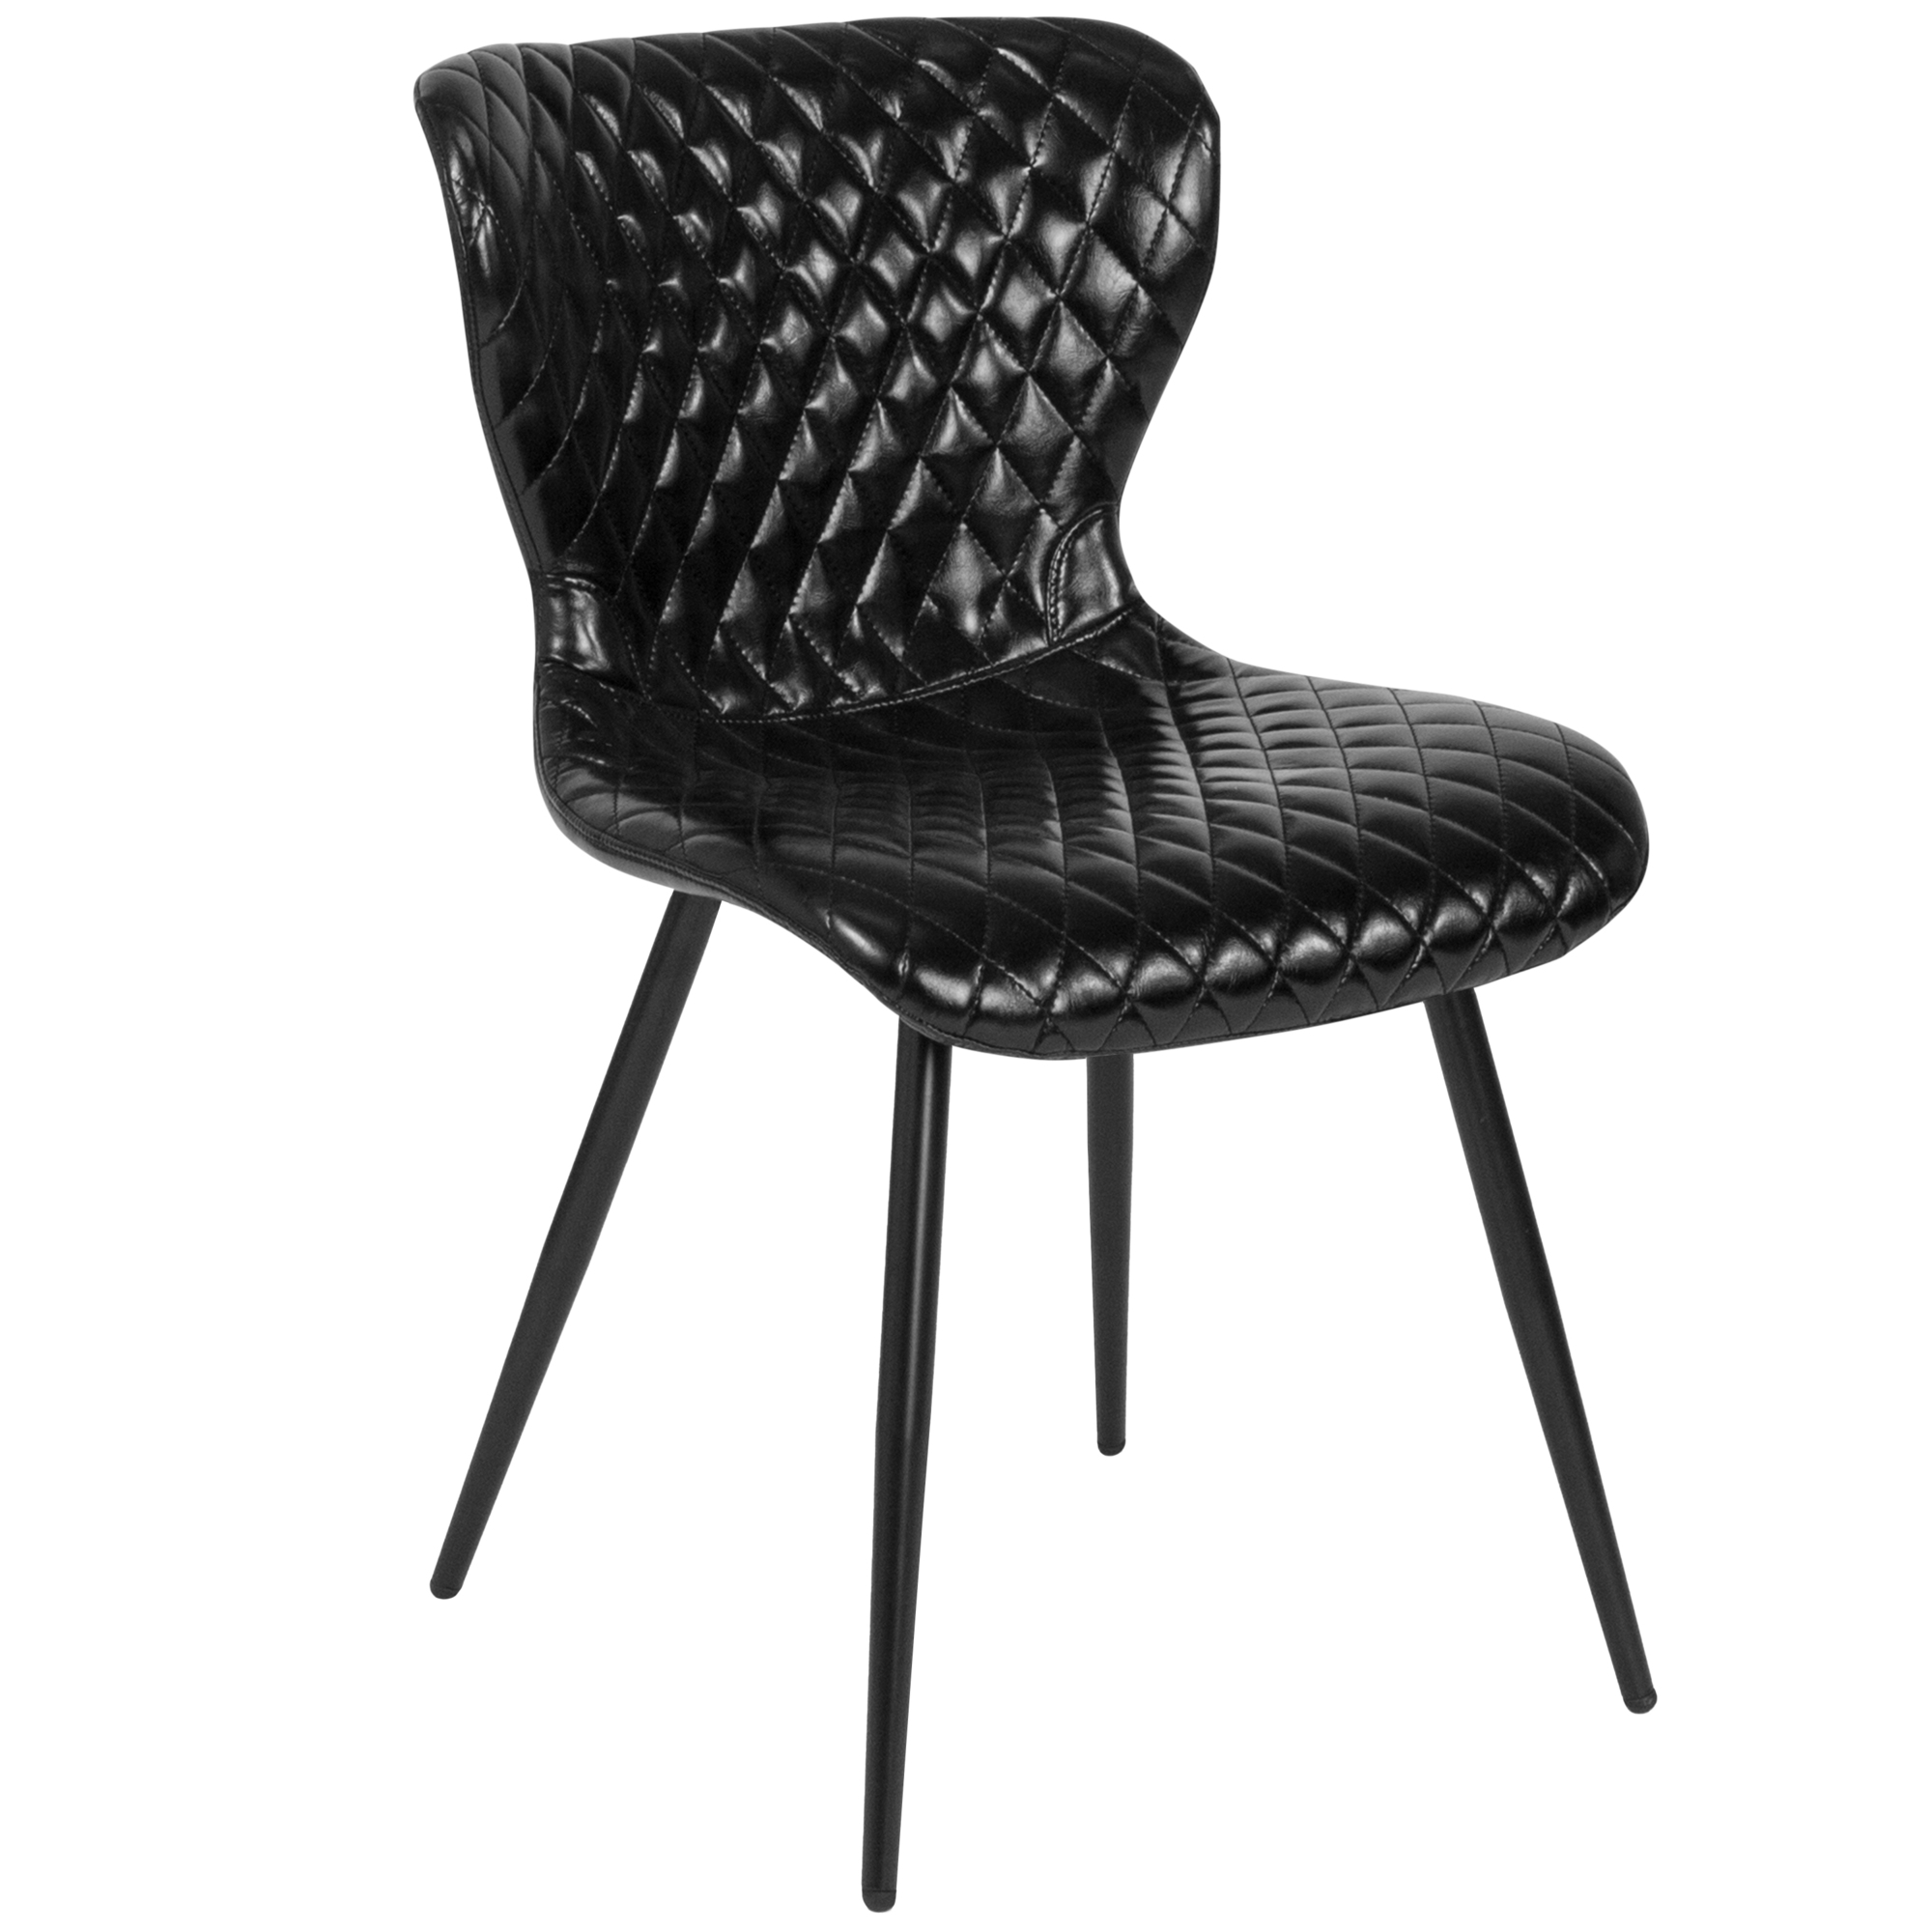 Flash Furniture, Contemporary Upholstered Chair in Black Vinyl, Primary Color Black, Included (qty.) 1, Model LF907ABLK